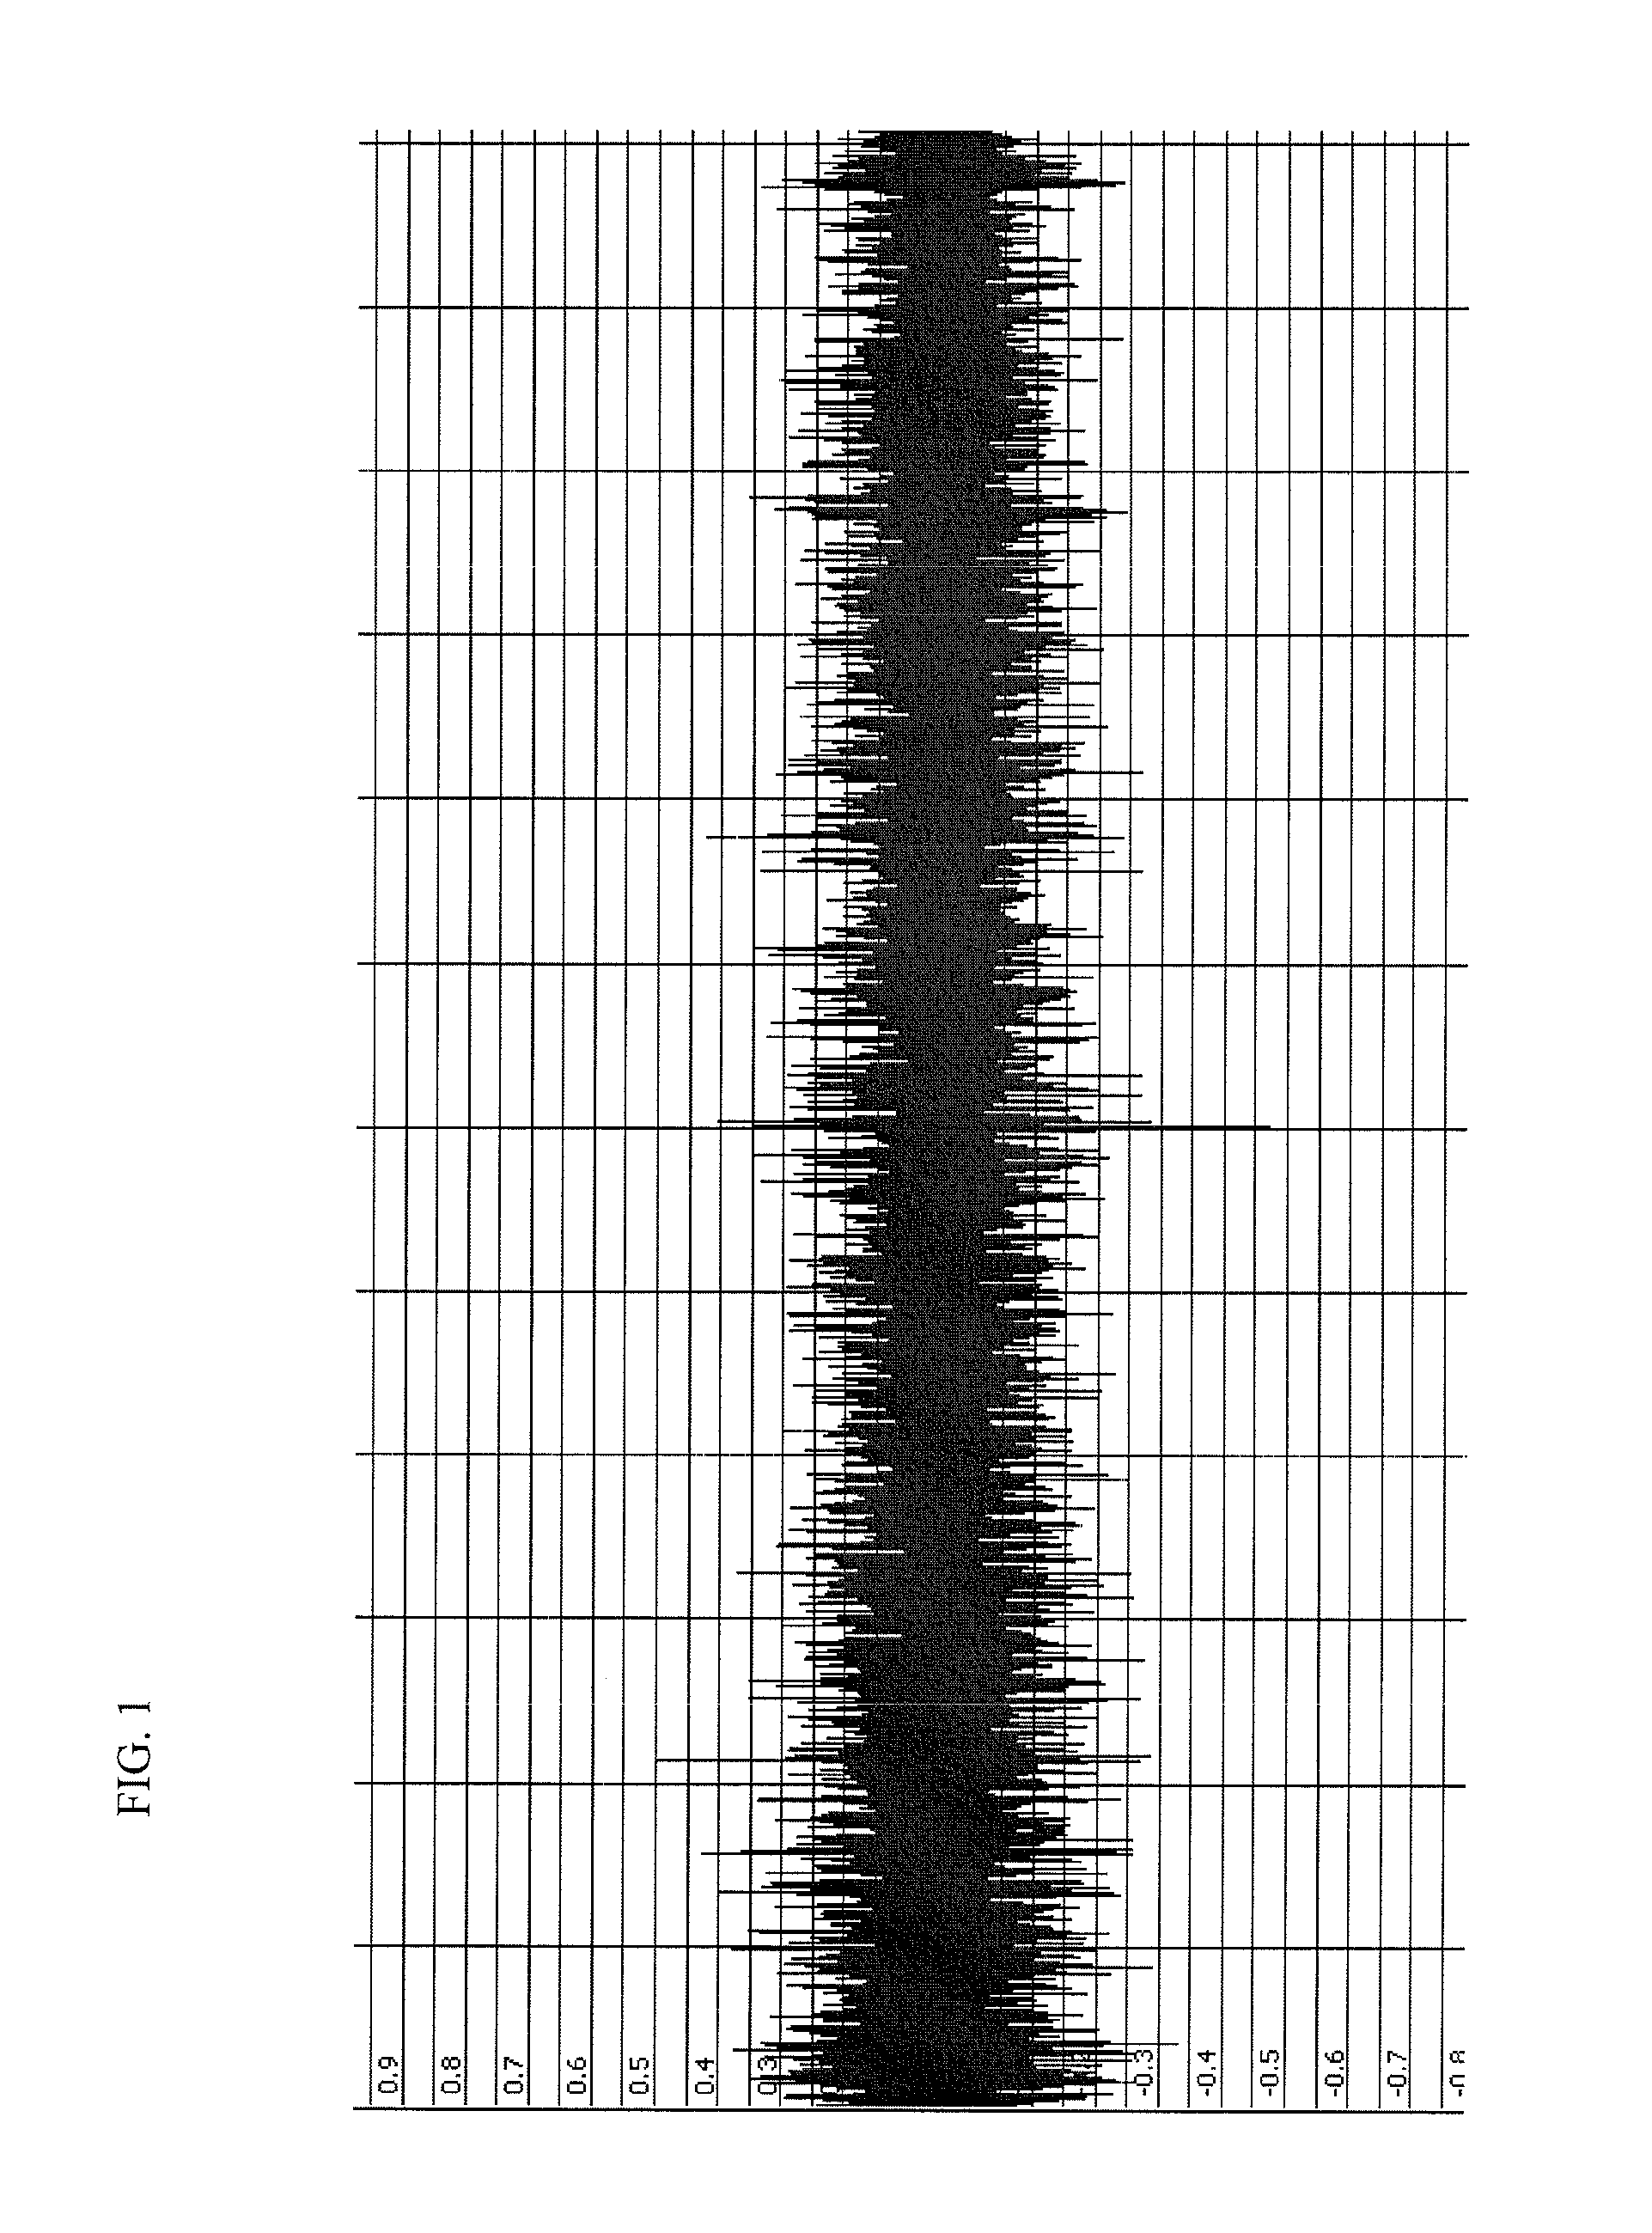 Method and apparatus for modifying an audio signal